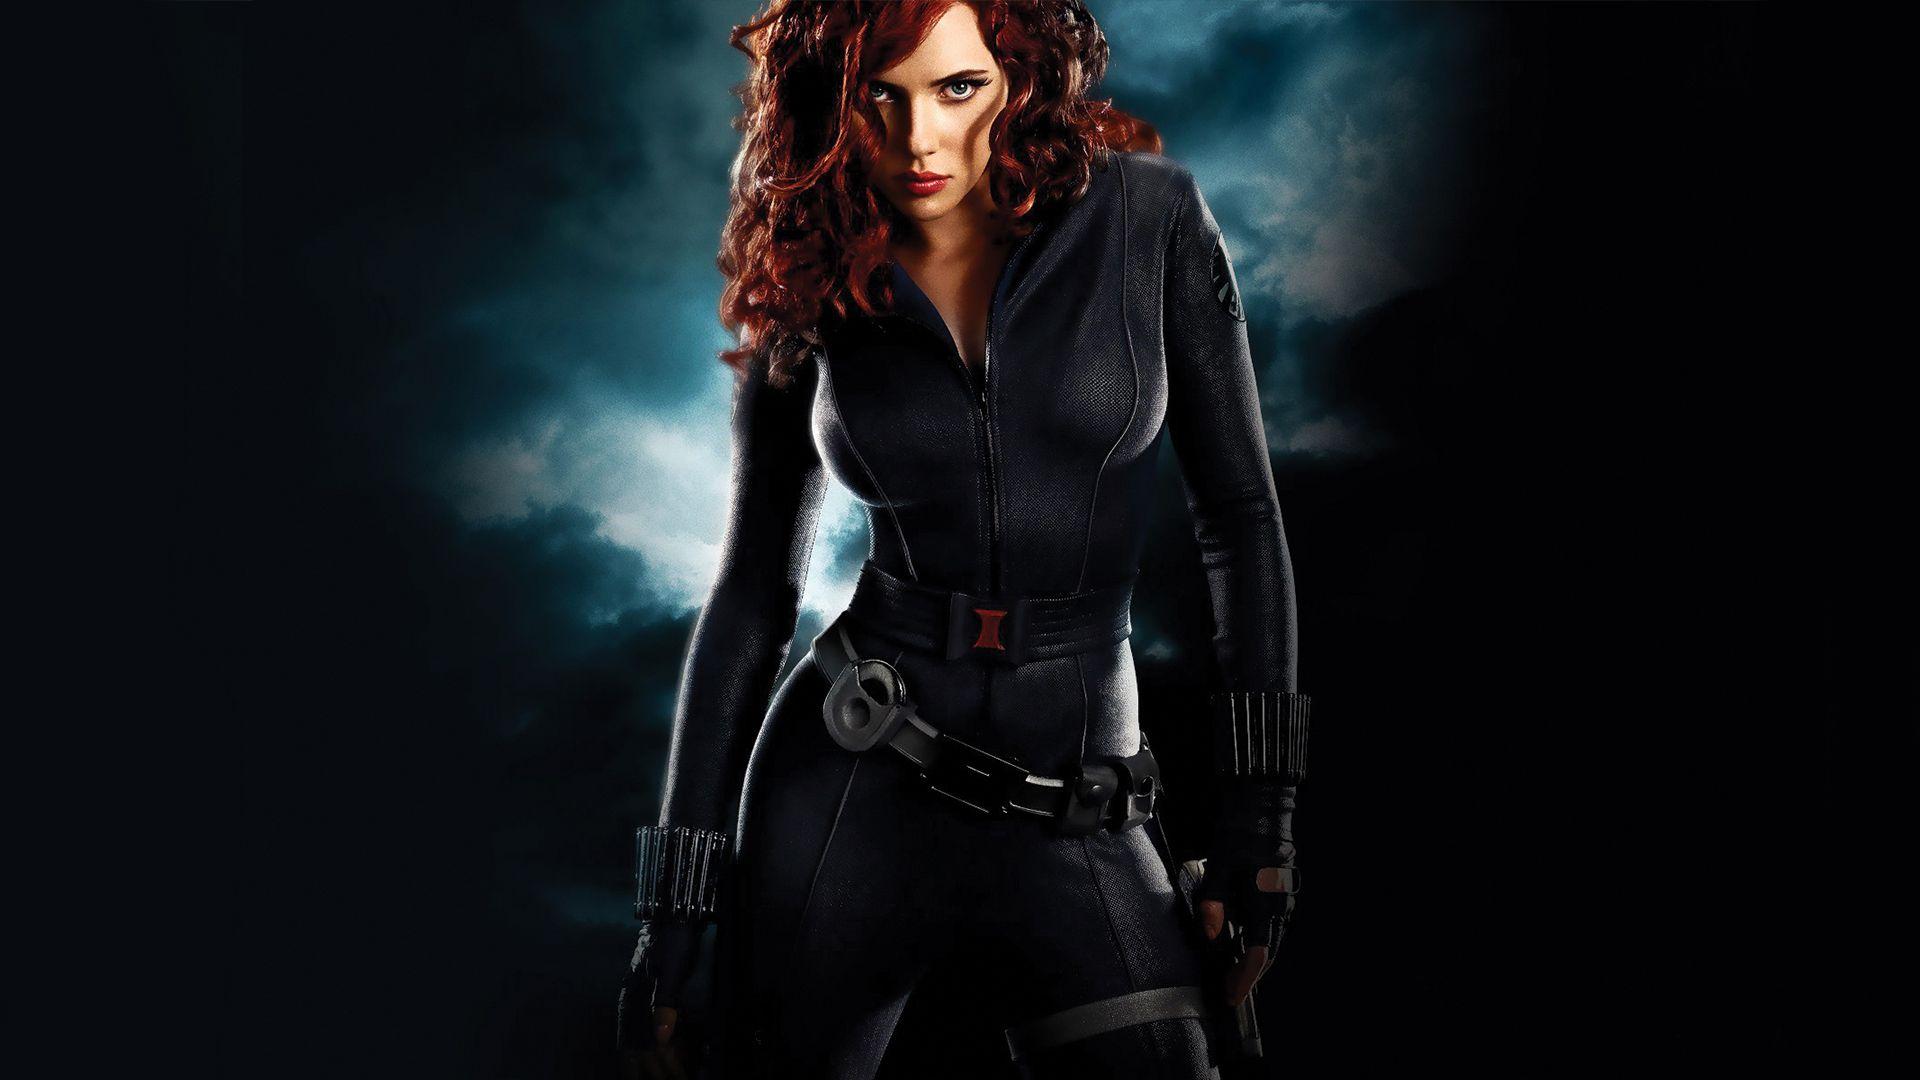 Black Widow wallpaper by MarvelWallpapers  Download on ZEDGE  0abe